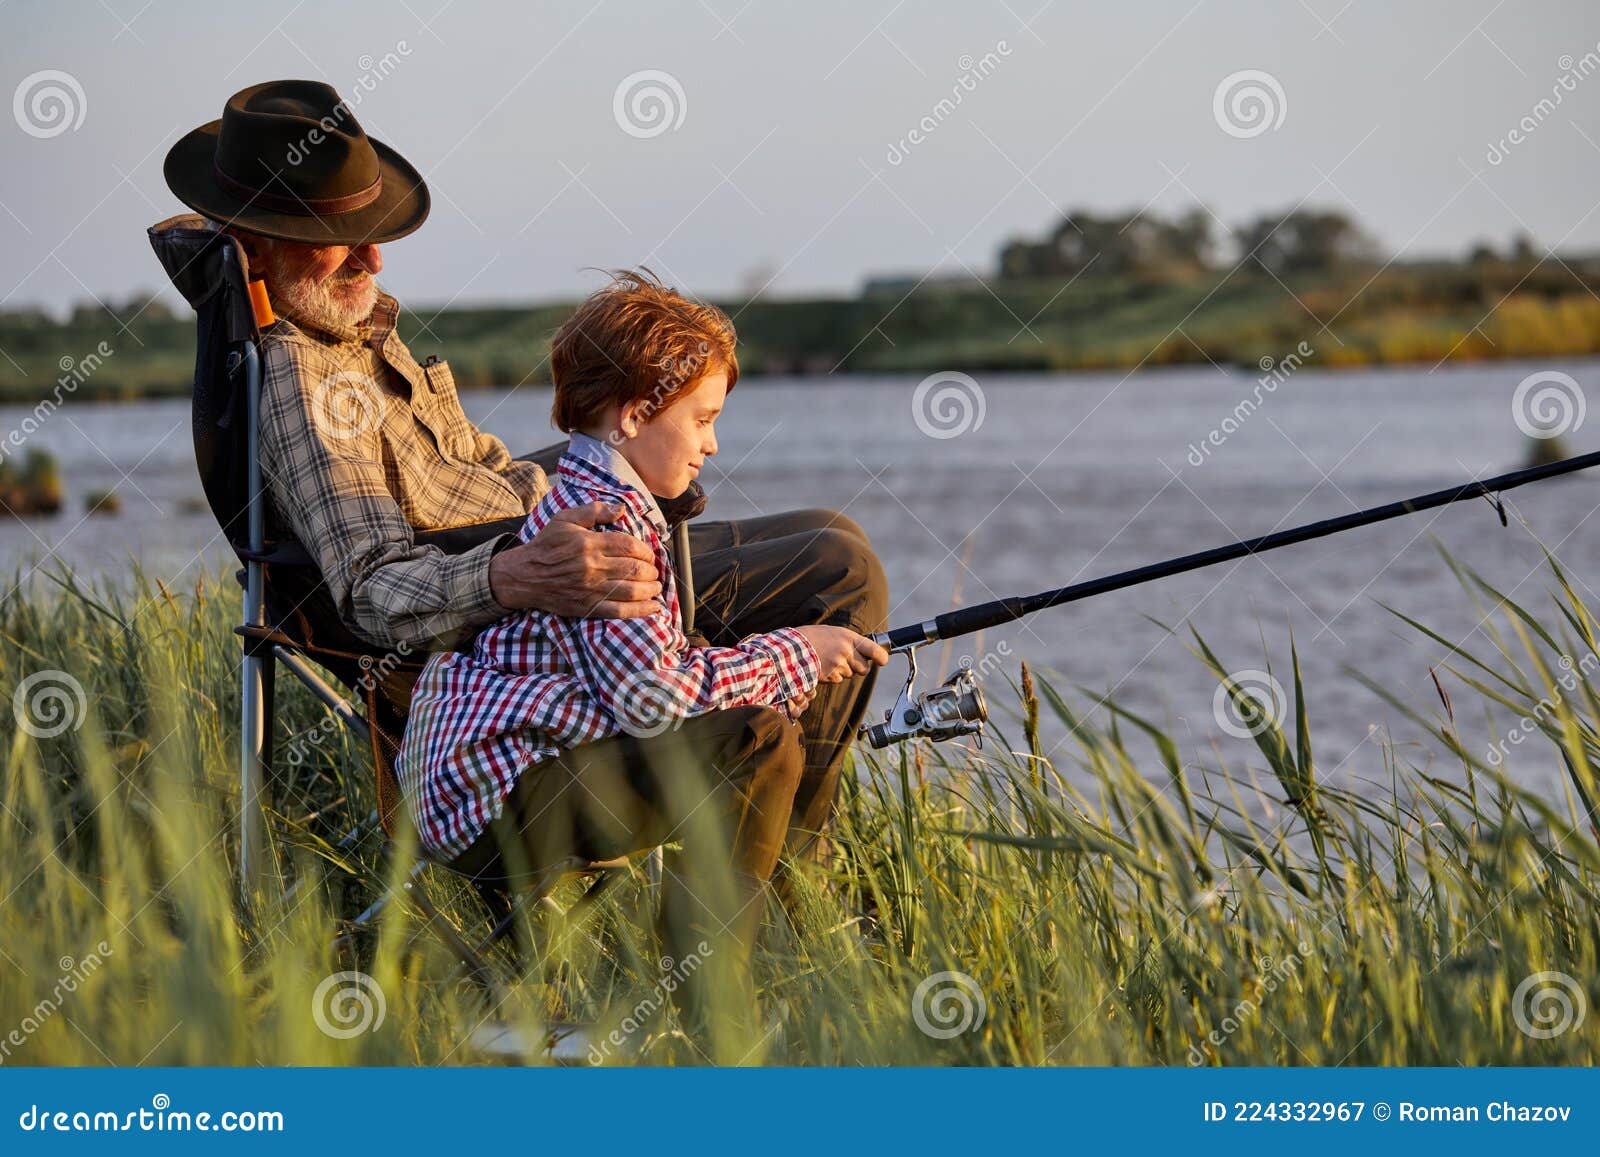 https://thumbs.dreamstime.com/z/senior-nice-man-little-boy-together-pond-fishing-rod-caucasian-redhead-learning-grandfather-park-nature-copy-224332967.jpg